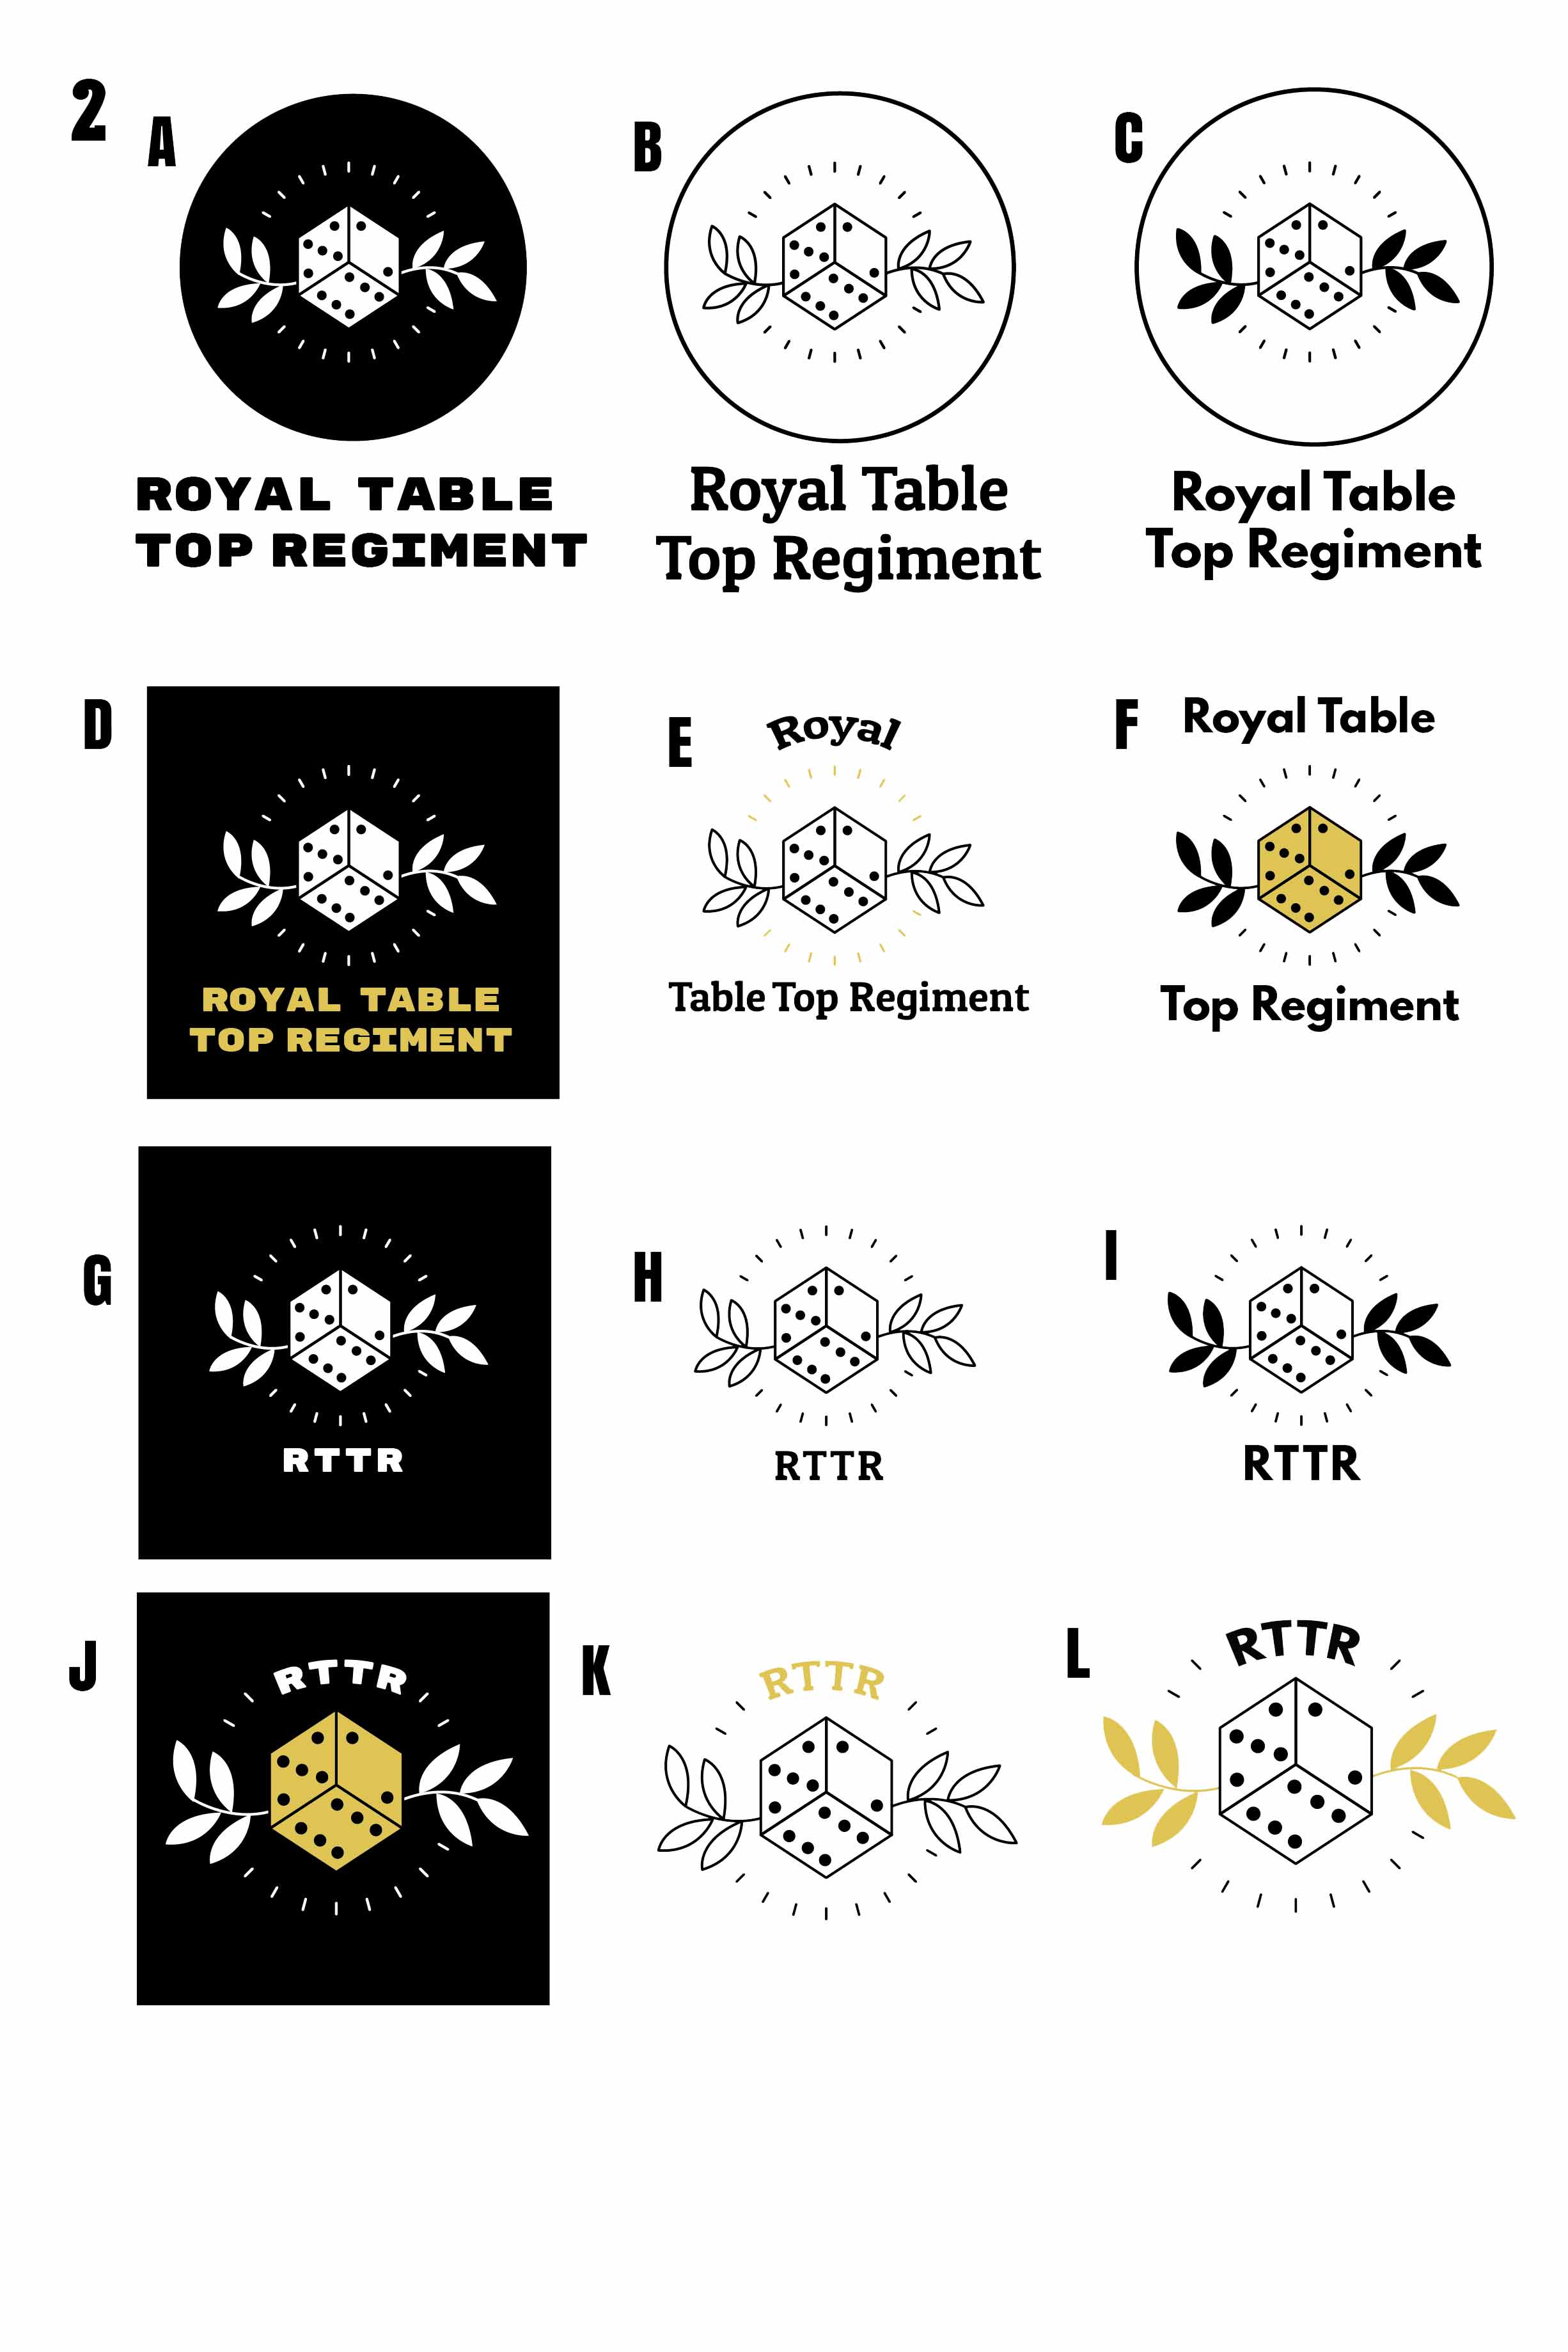 Image of the process of creating the new RTTR logo